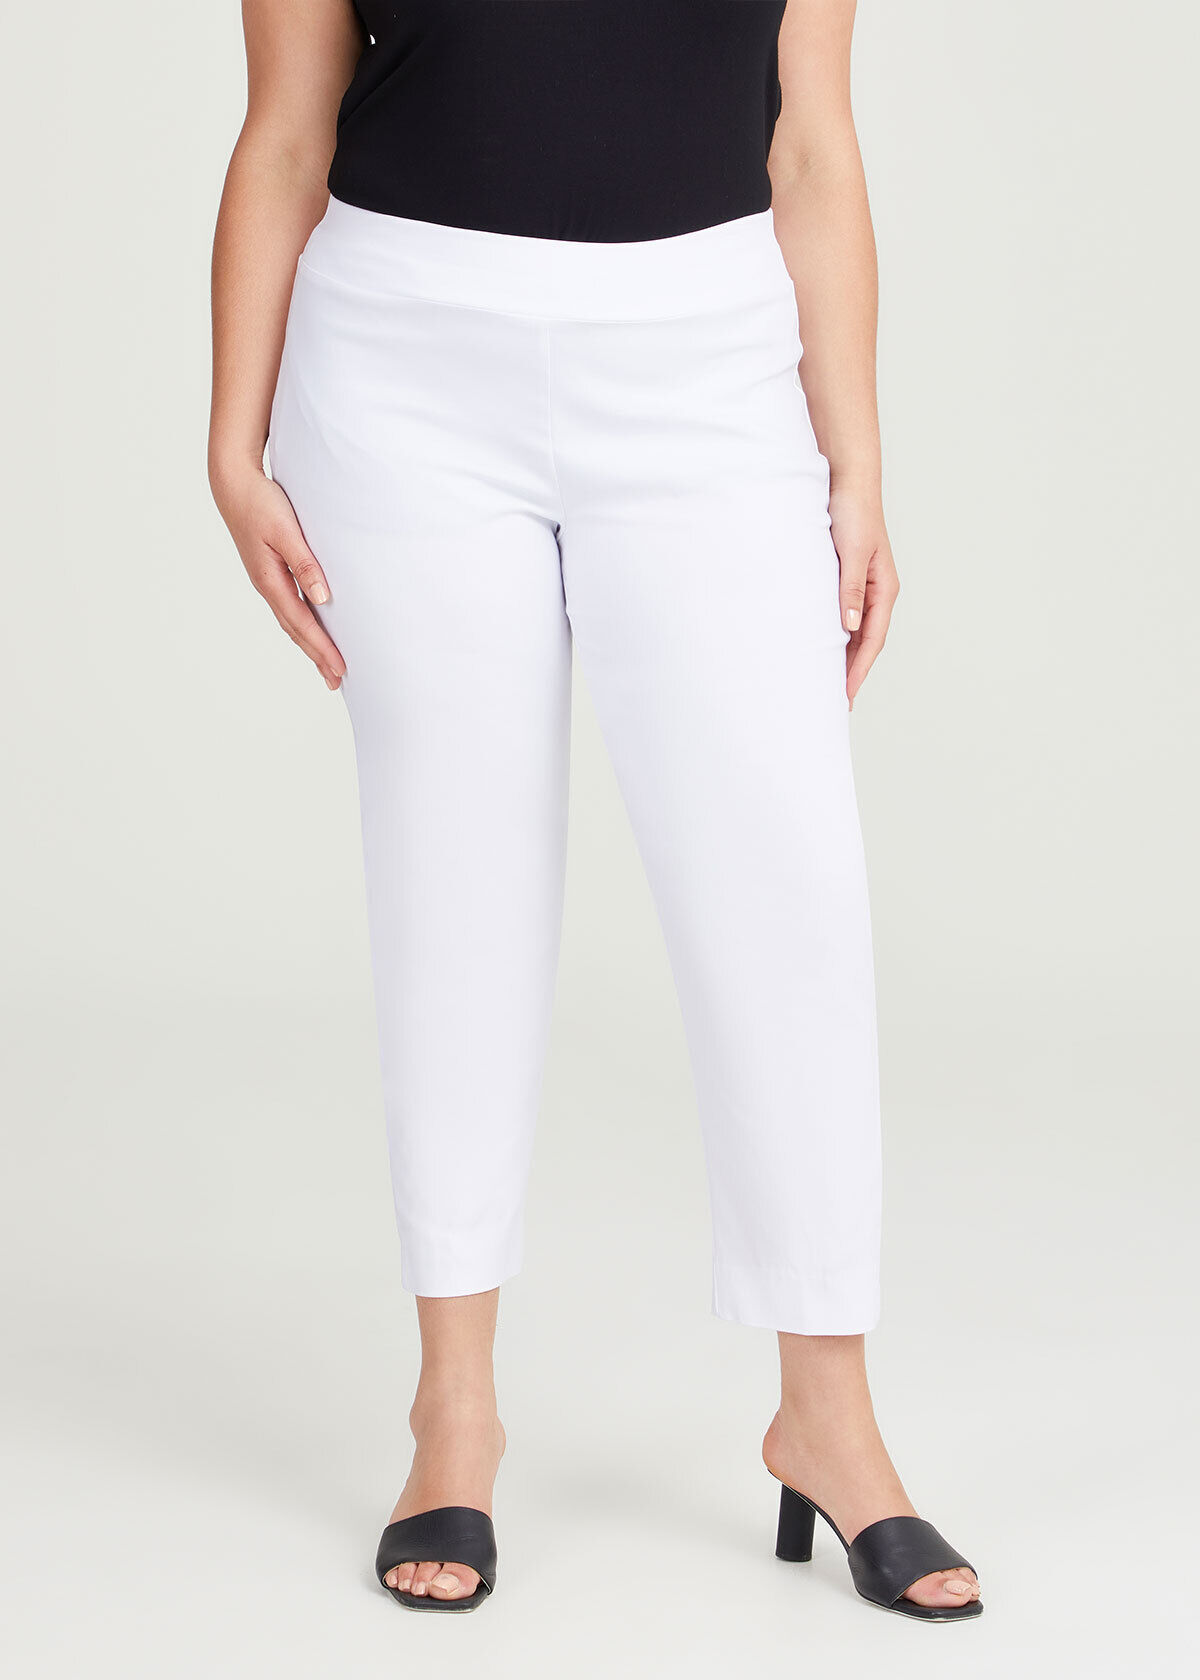 Dezsed Work Pants for Women Plus Size Bell Bottom Trousers Ttraight Tigh  Waist Stretch Pants - Walmart.com